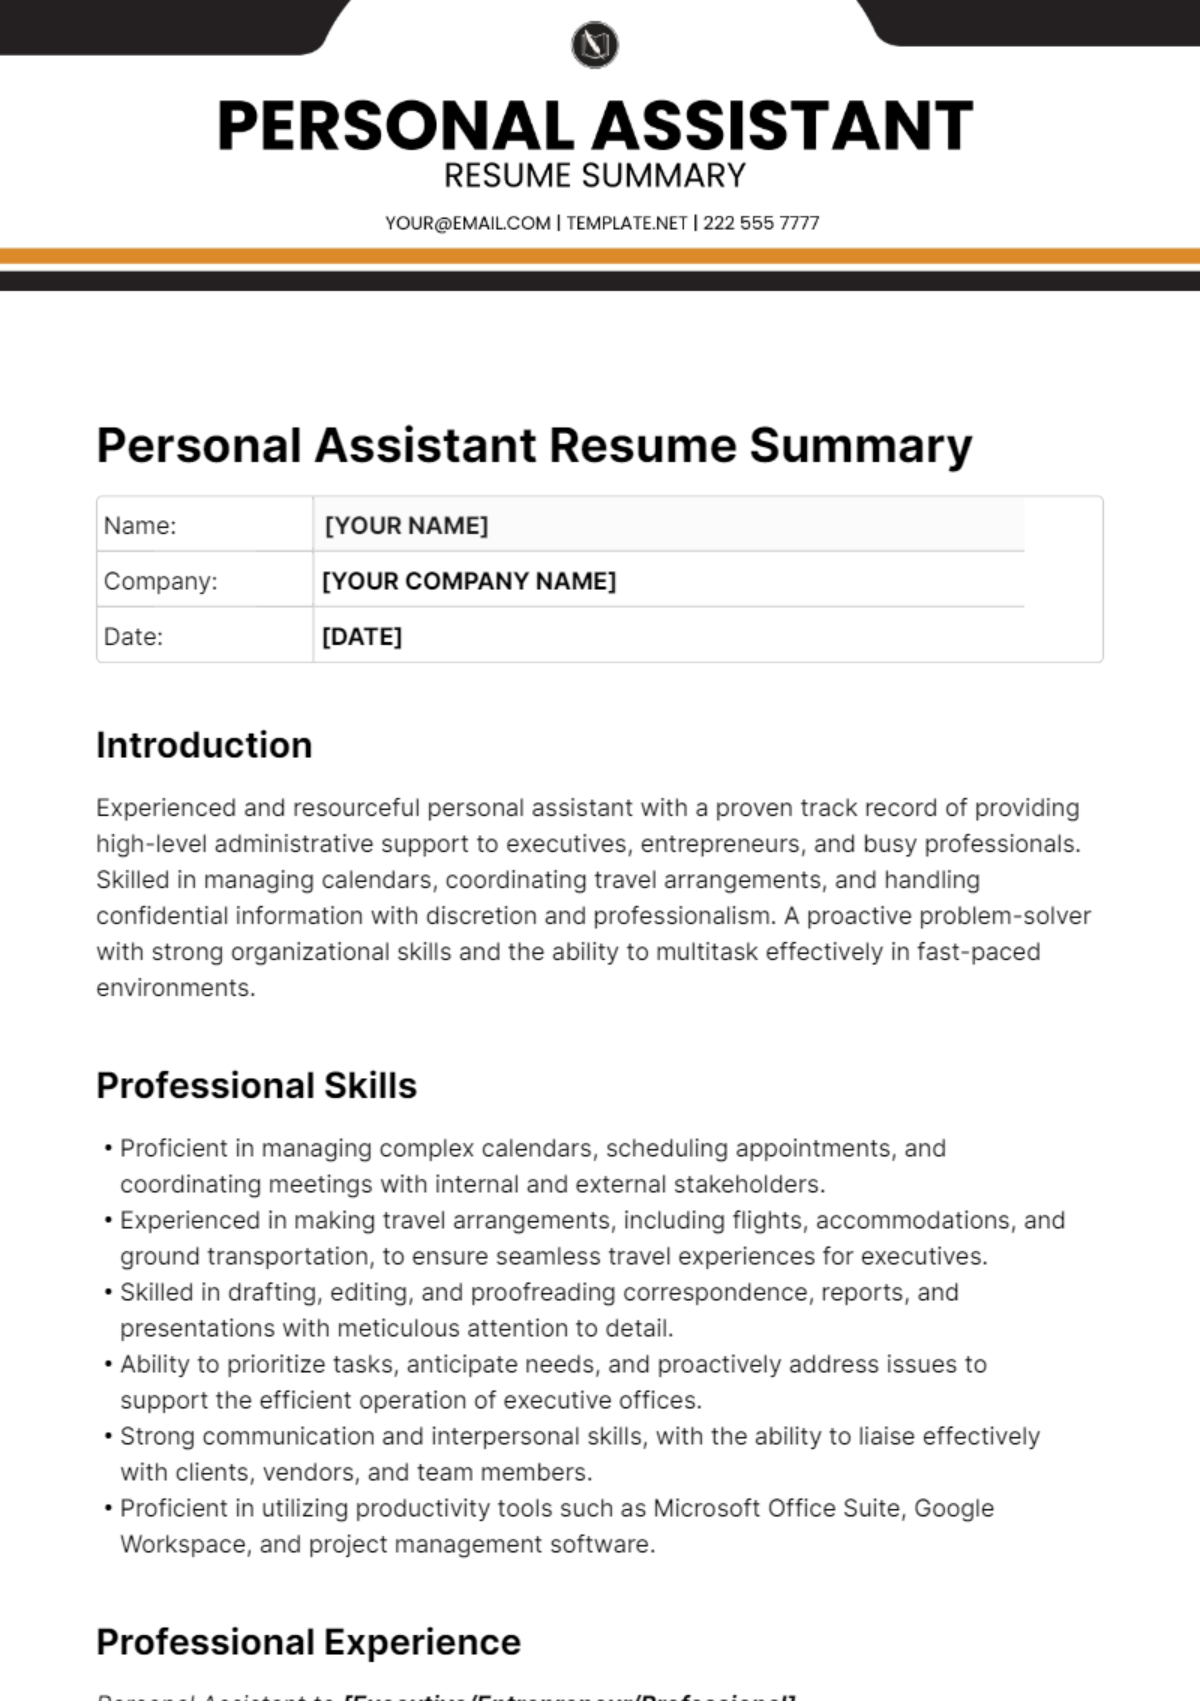 Personal Assistant Resume Summary Template